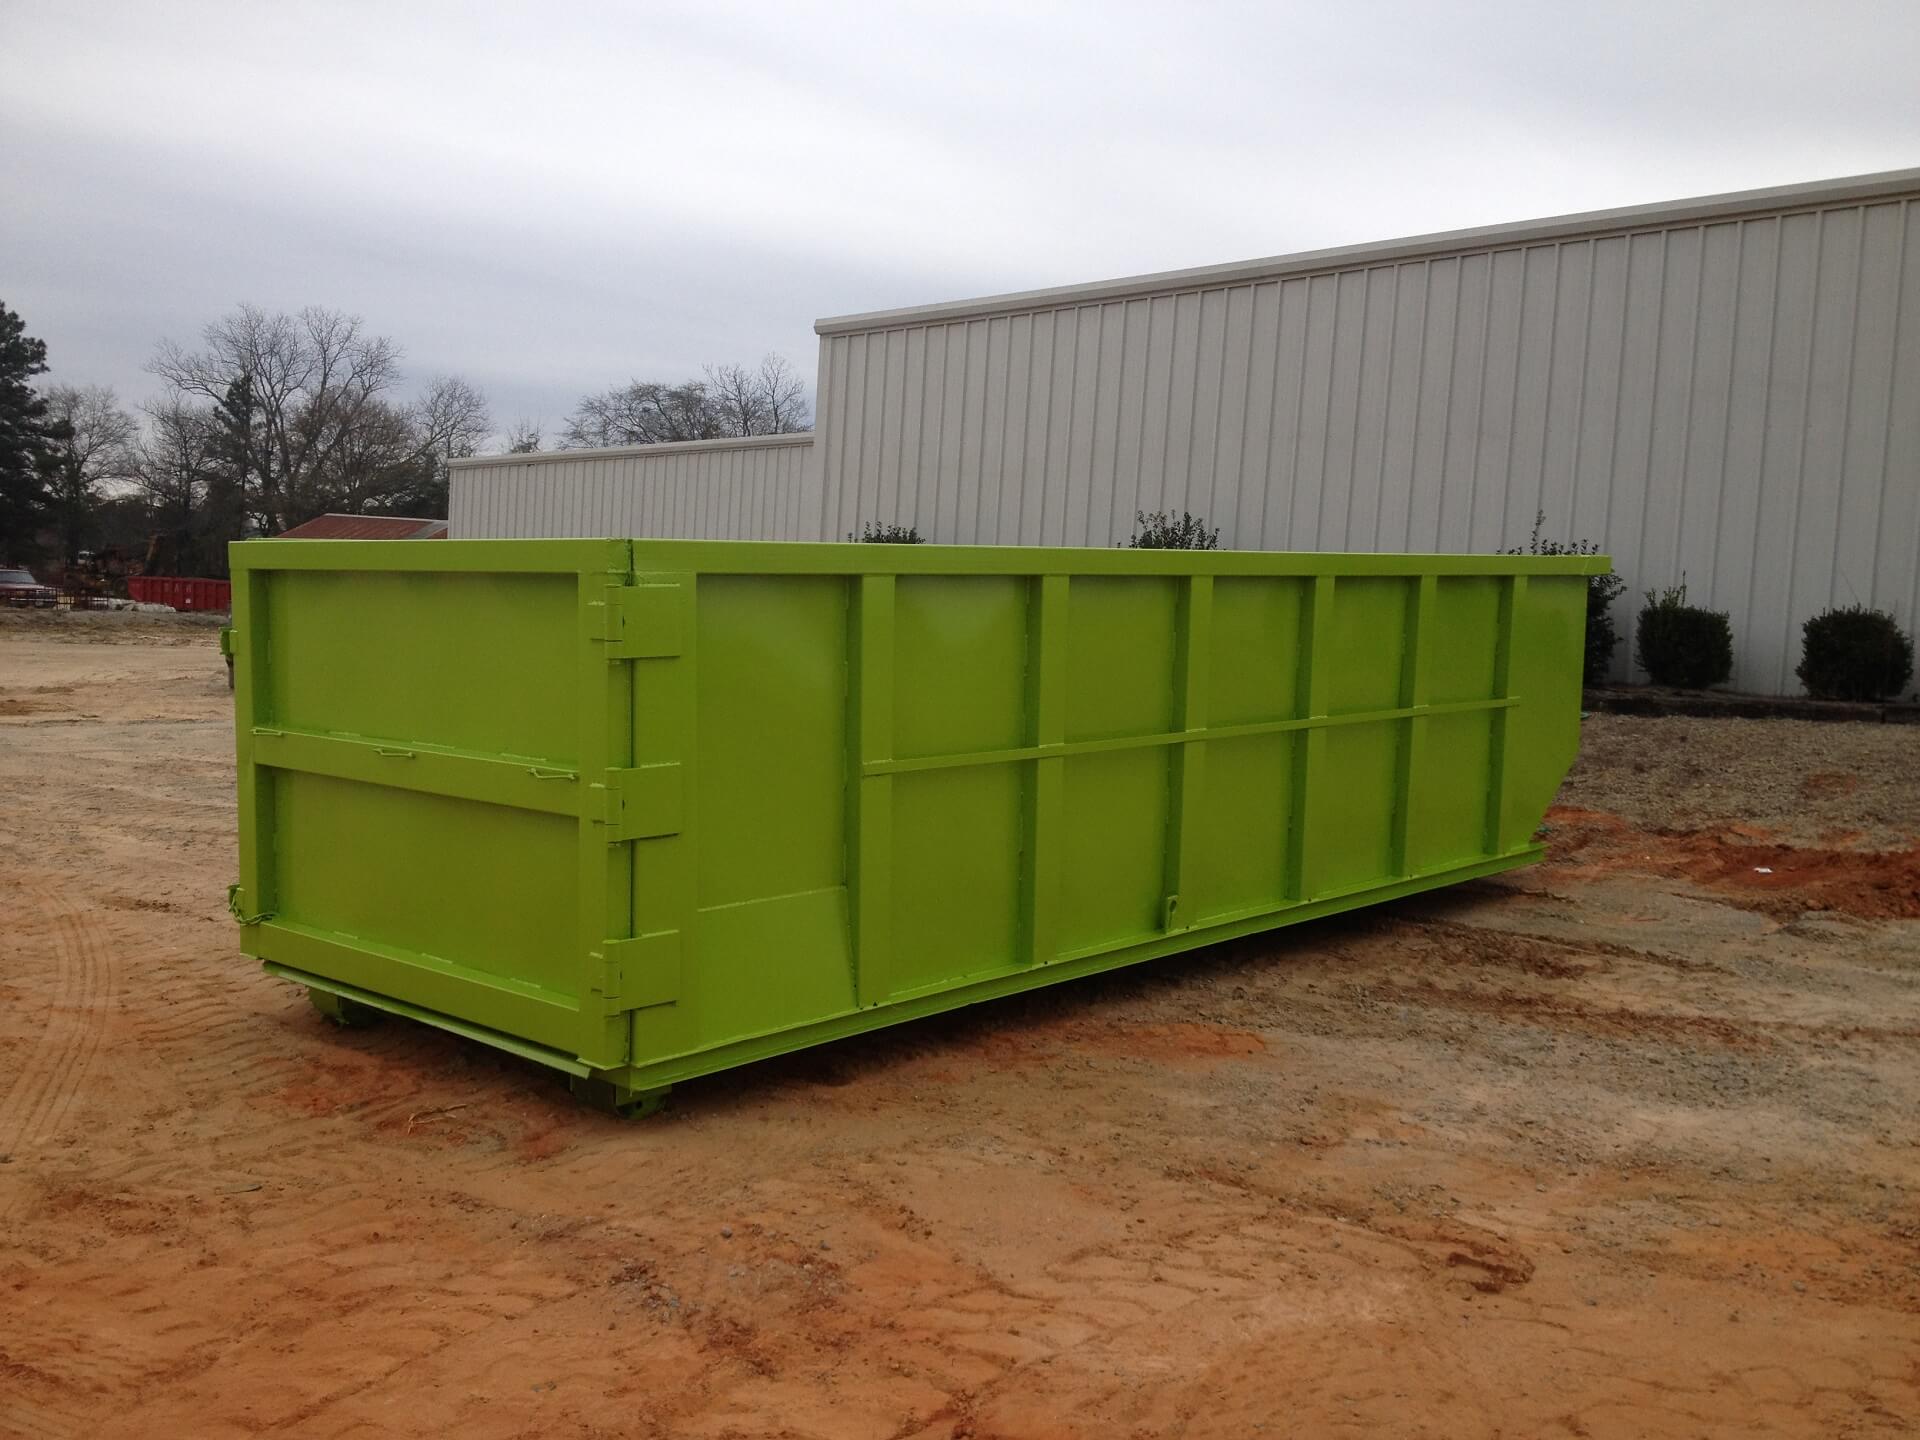 30 Cubic Yard Dumpster Colorado Dumpster Services Of Greeley